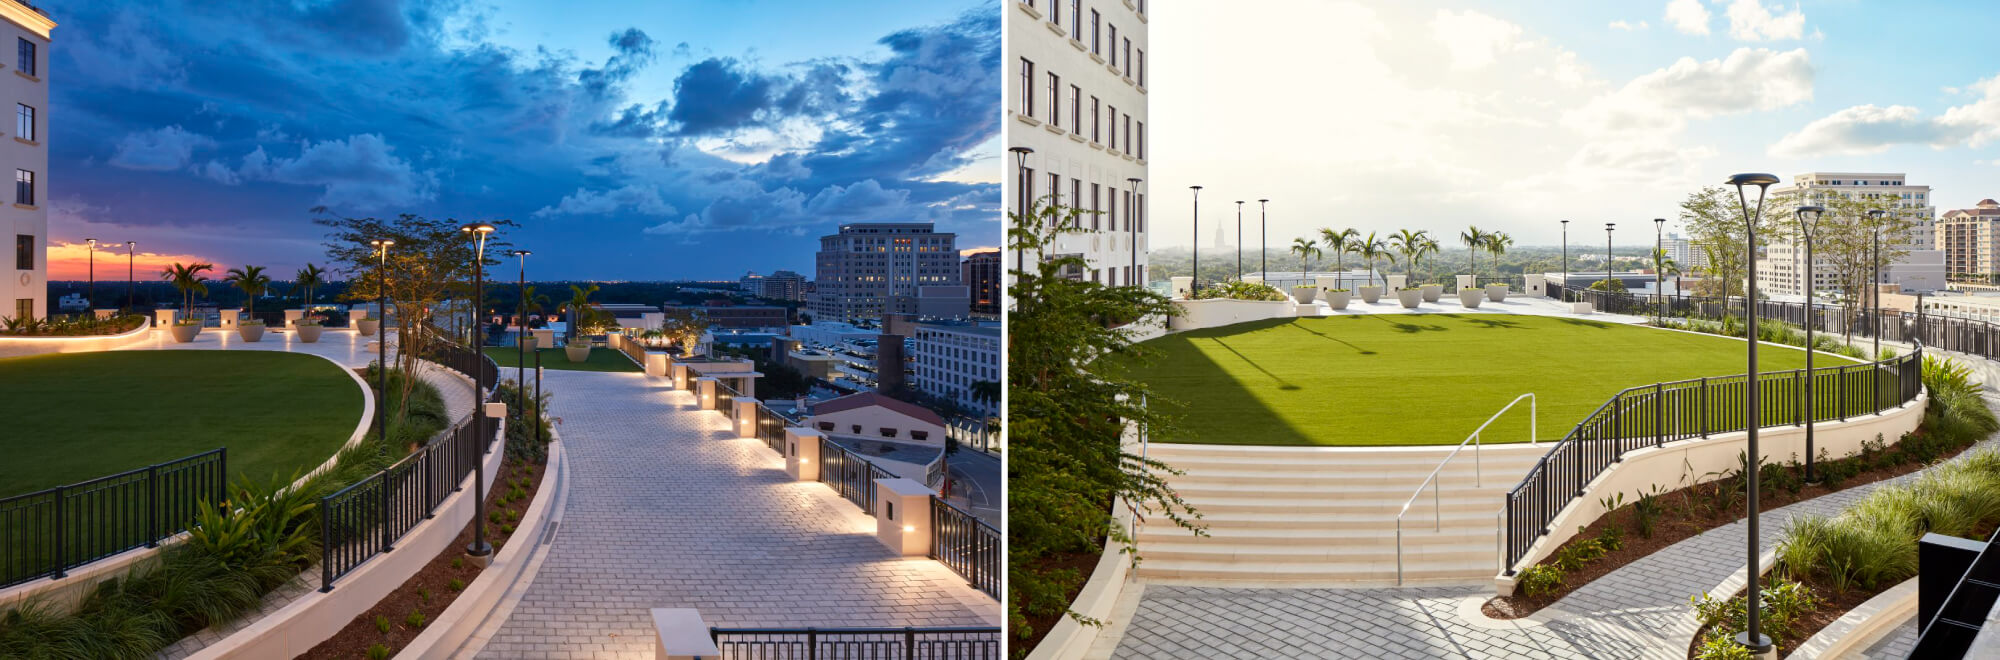 Lowes Coral Gables grounds at night and day